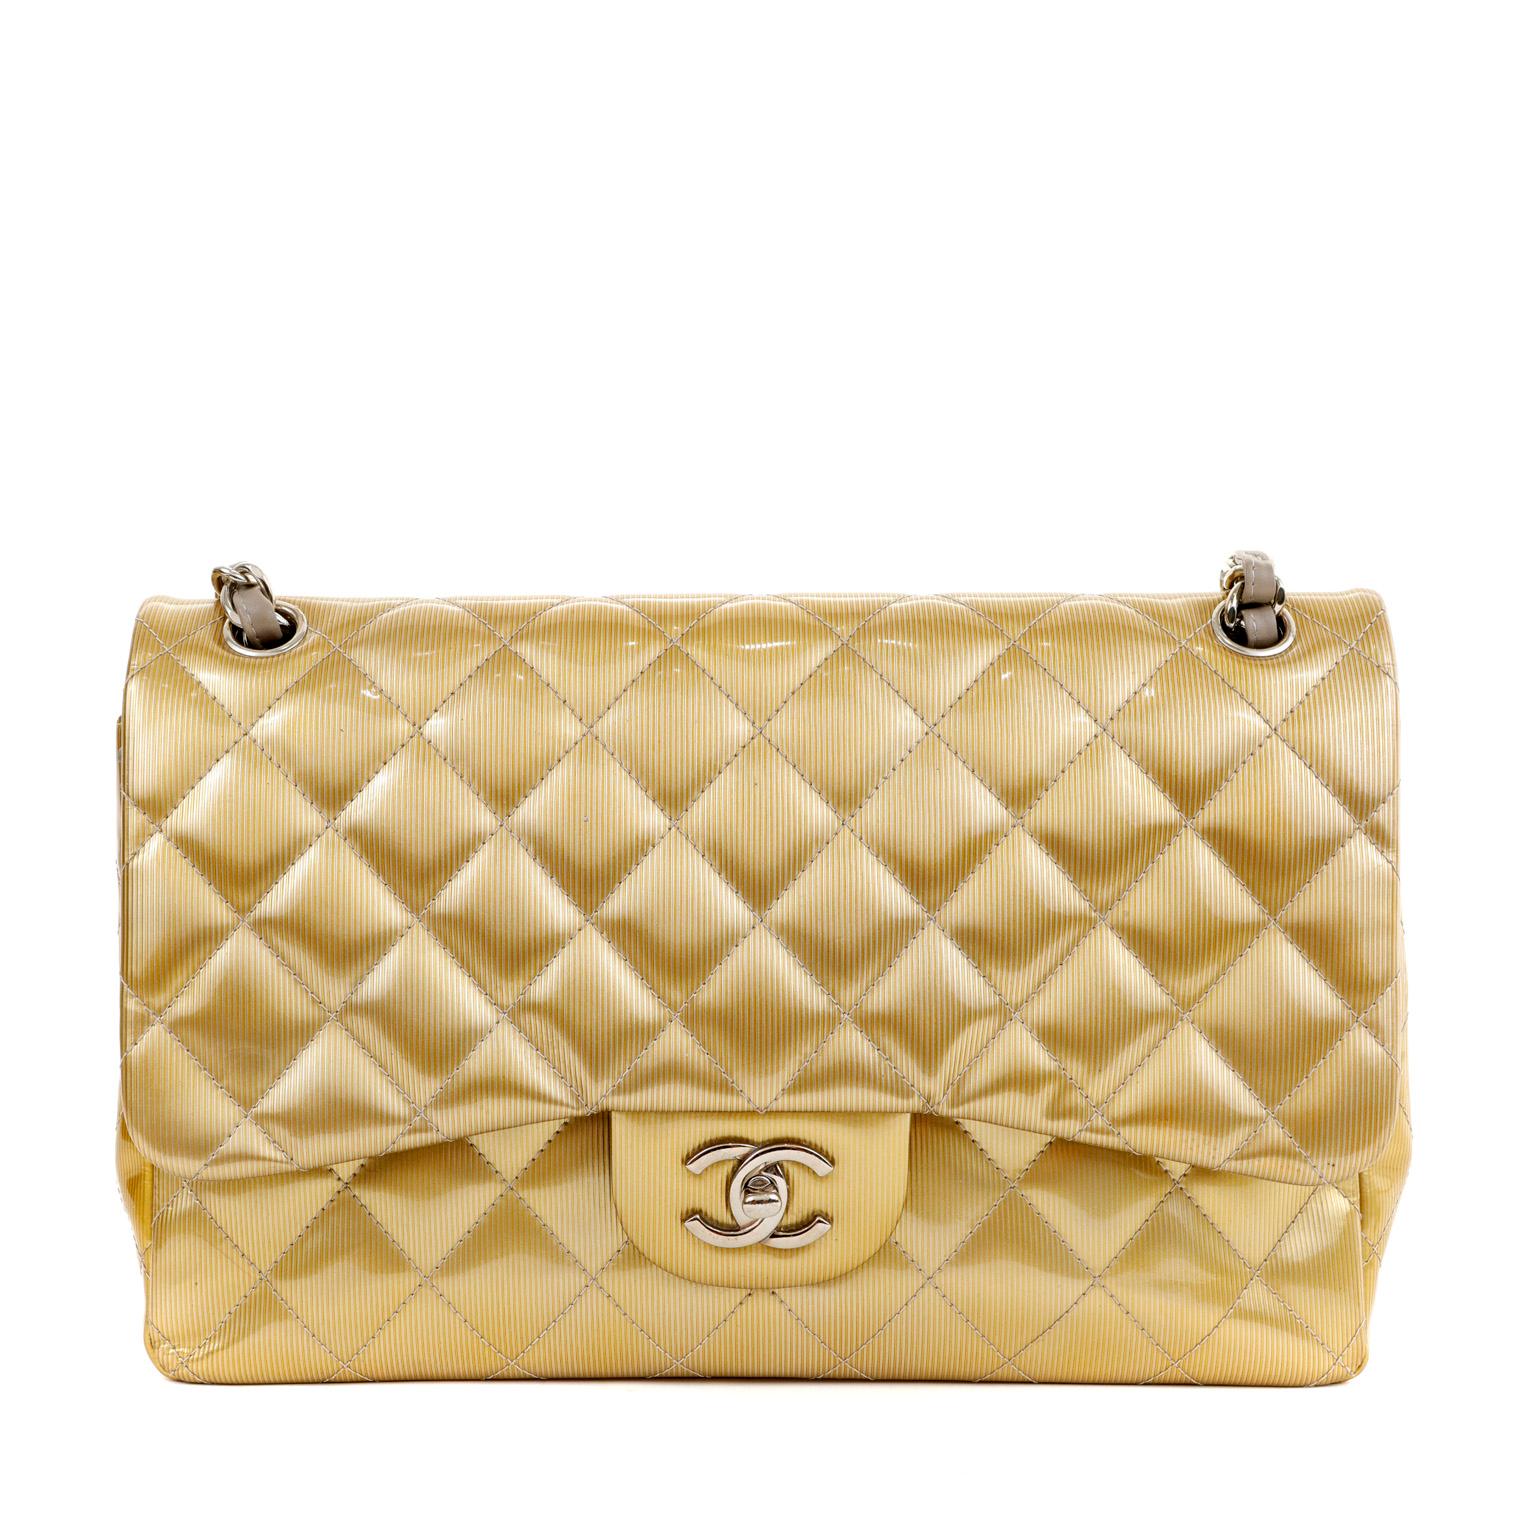 This authentic Chanel Gold Patent Leather Jumbo Classic Flap is a runway piece in pristine condition.  Truly timeless, the Jumbo Classic is certain to hold its value.

Bright gold metallic patent leather is quilted in signature Chanel diamond